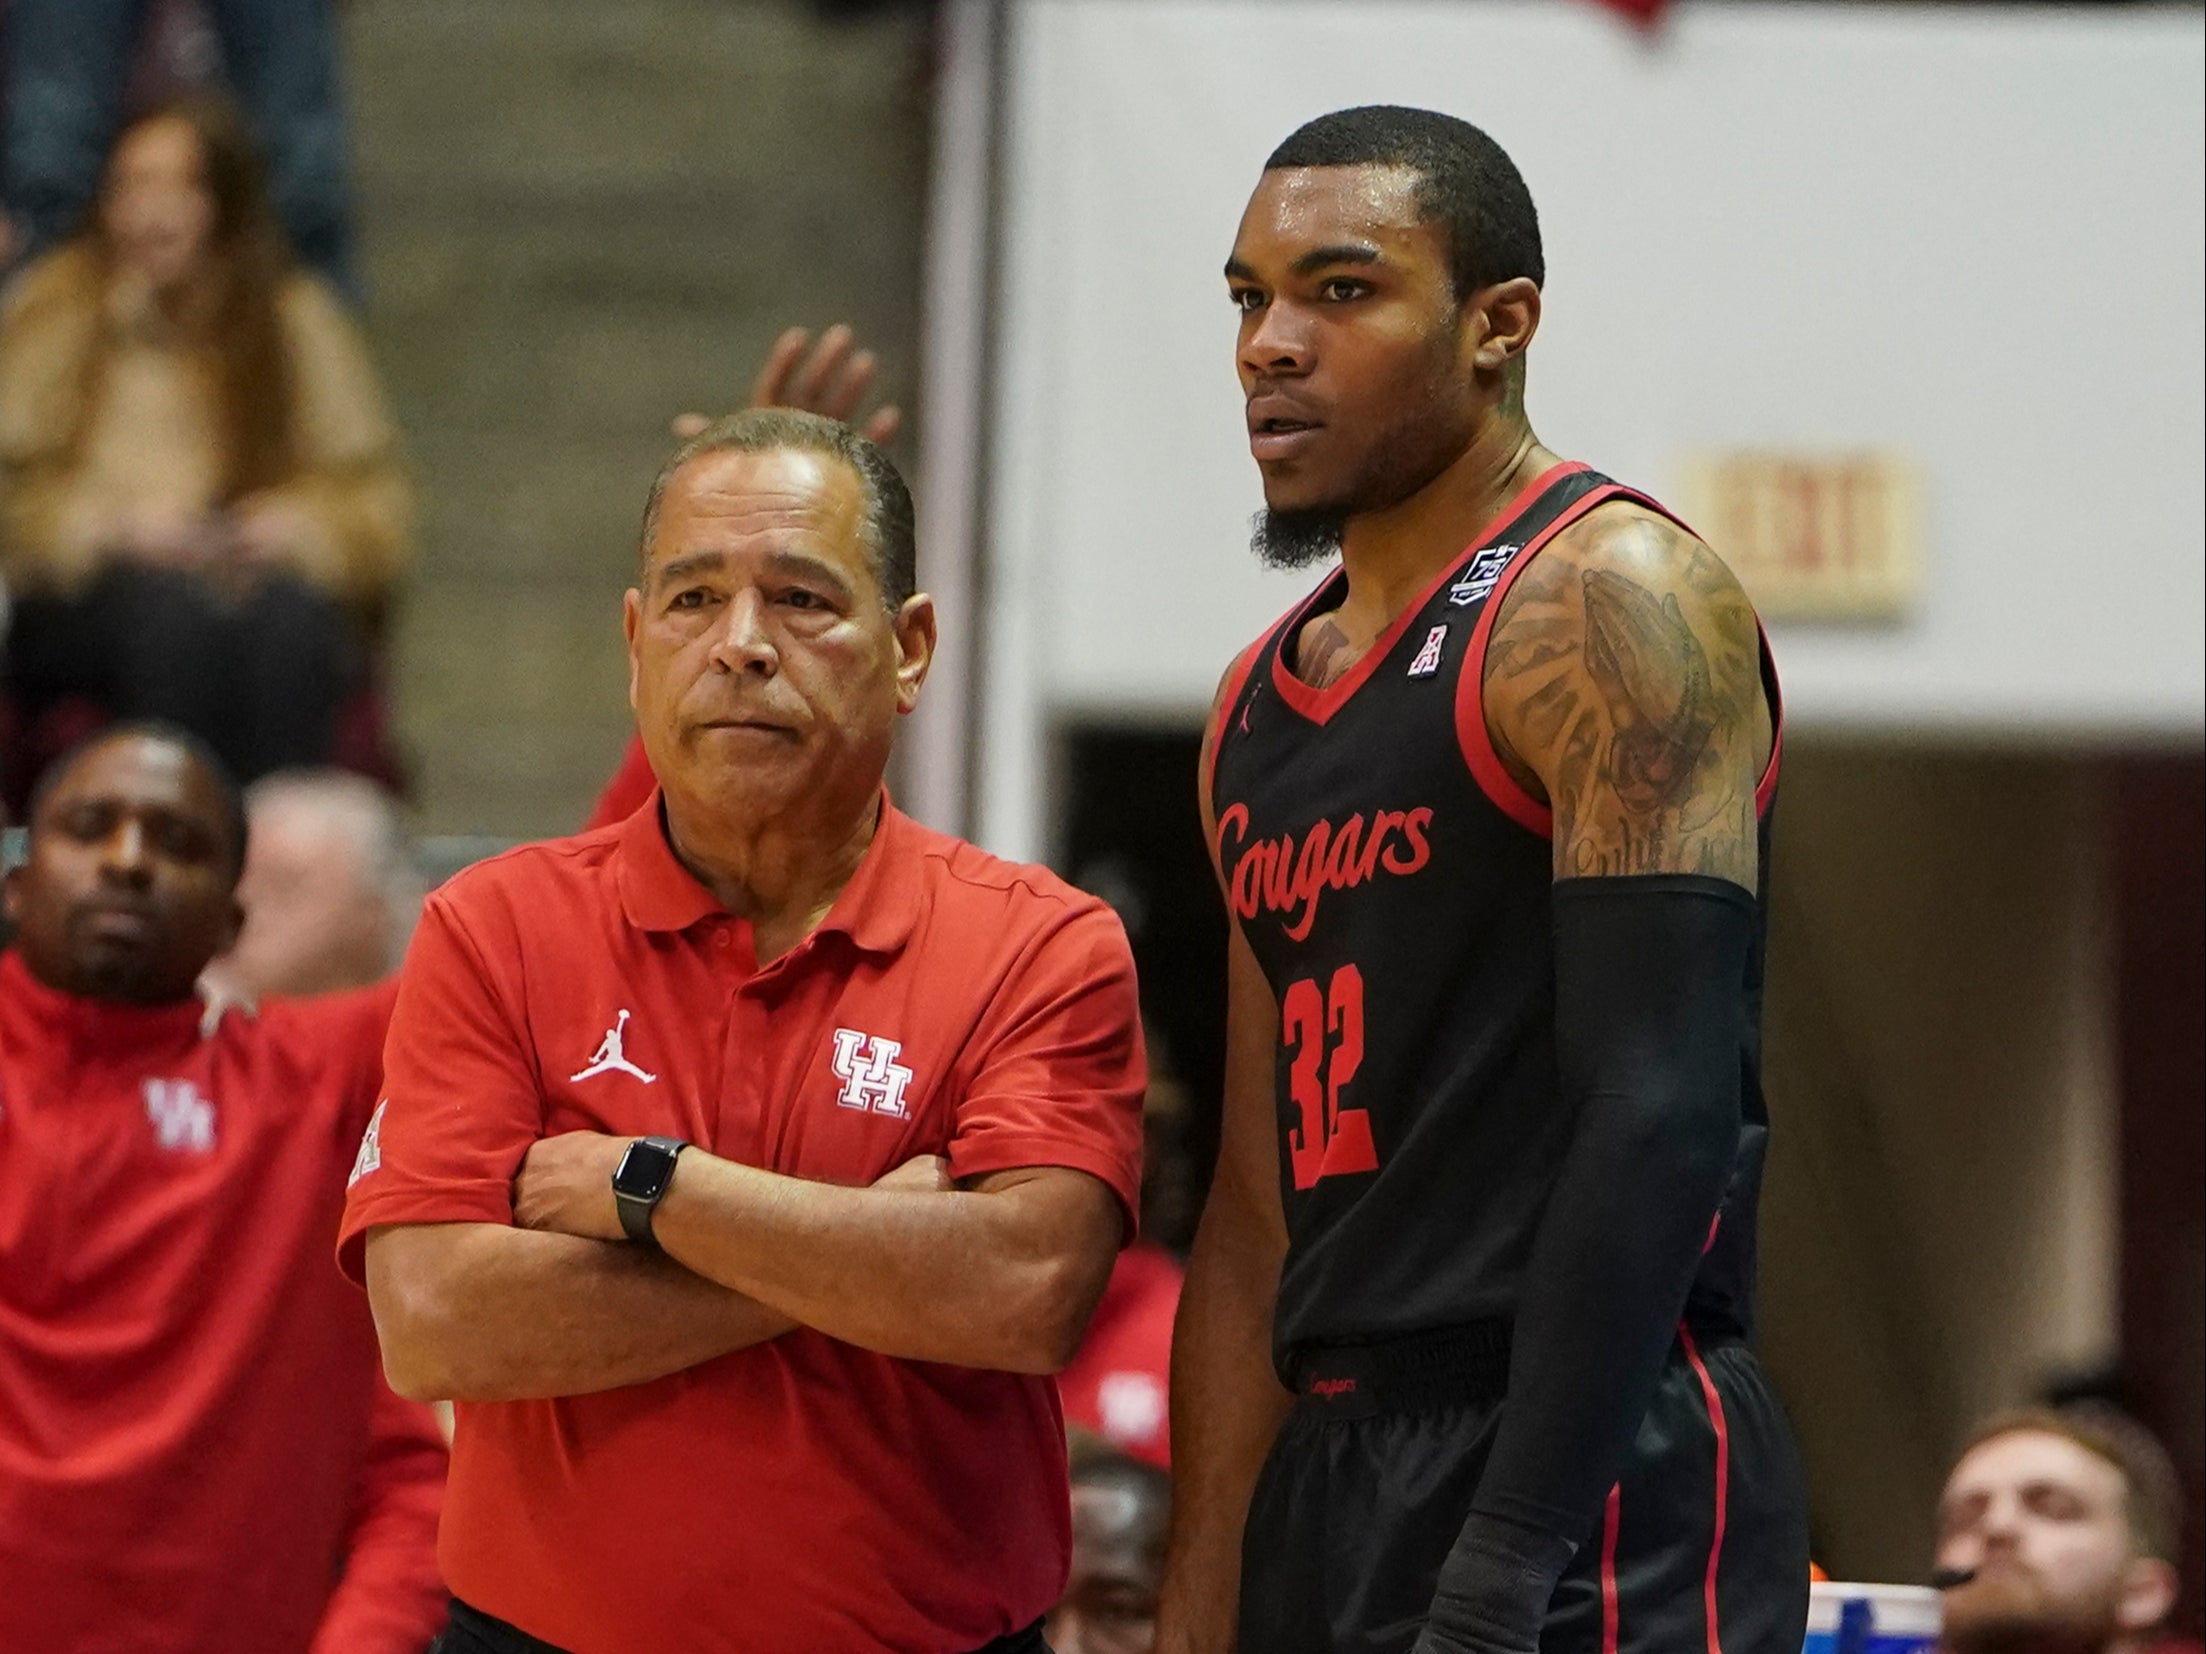 Reggie Chaney playing for the University of Houston Cougars in 2021. He is pictured here with head coach Kelvin Sampson